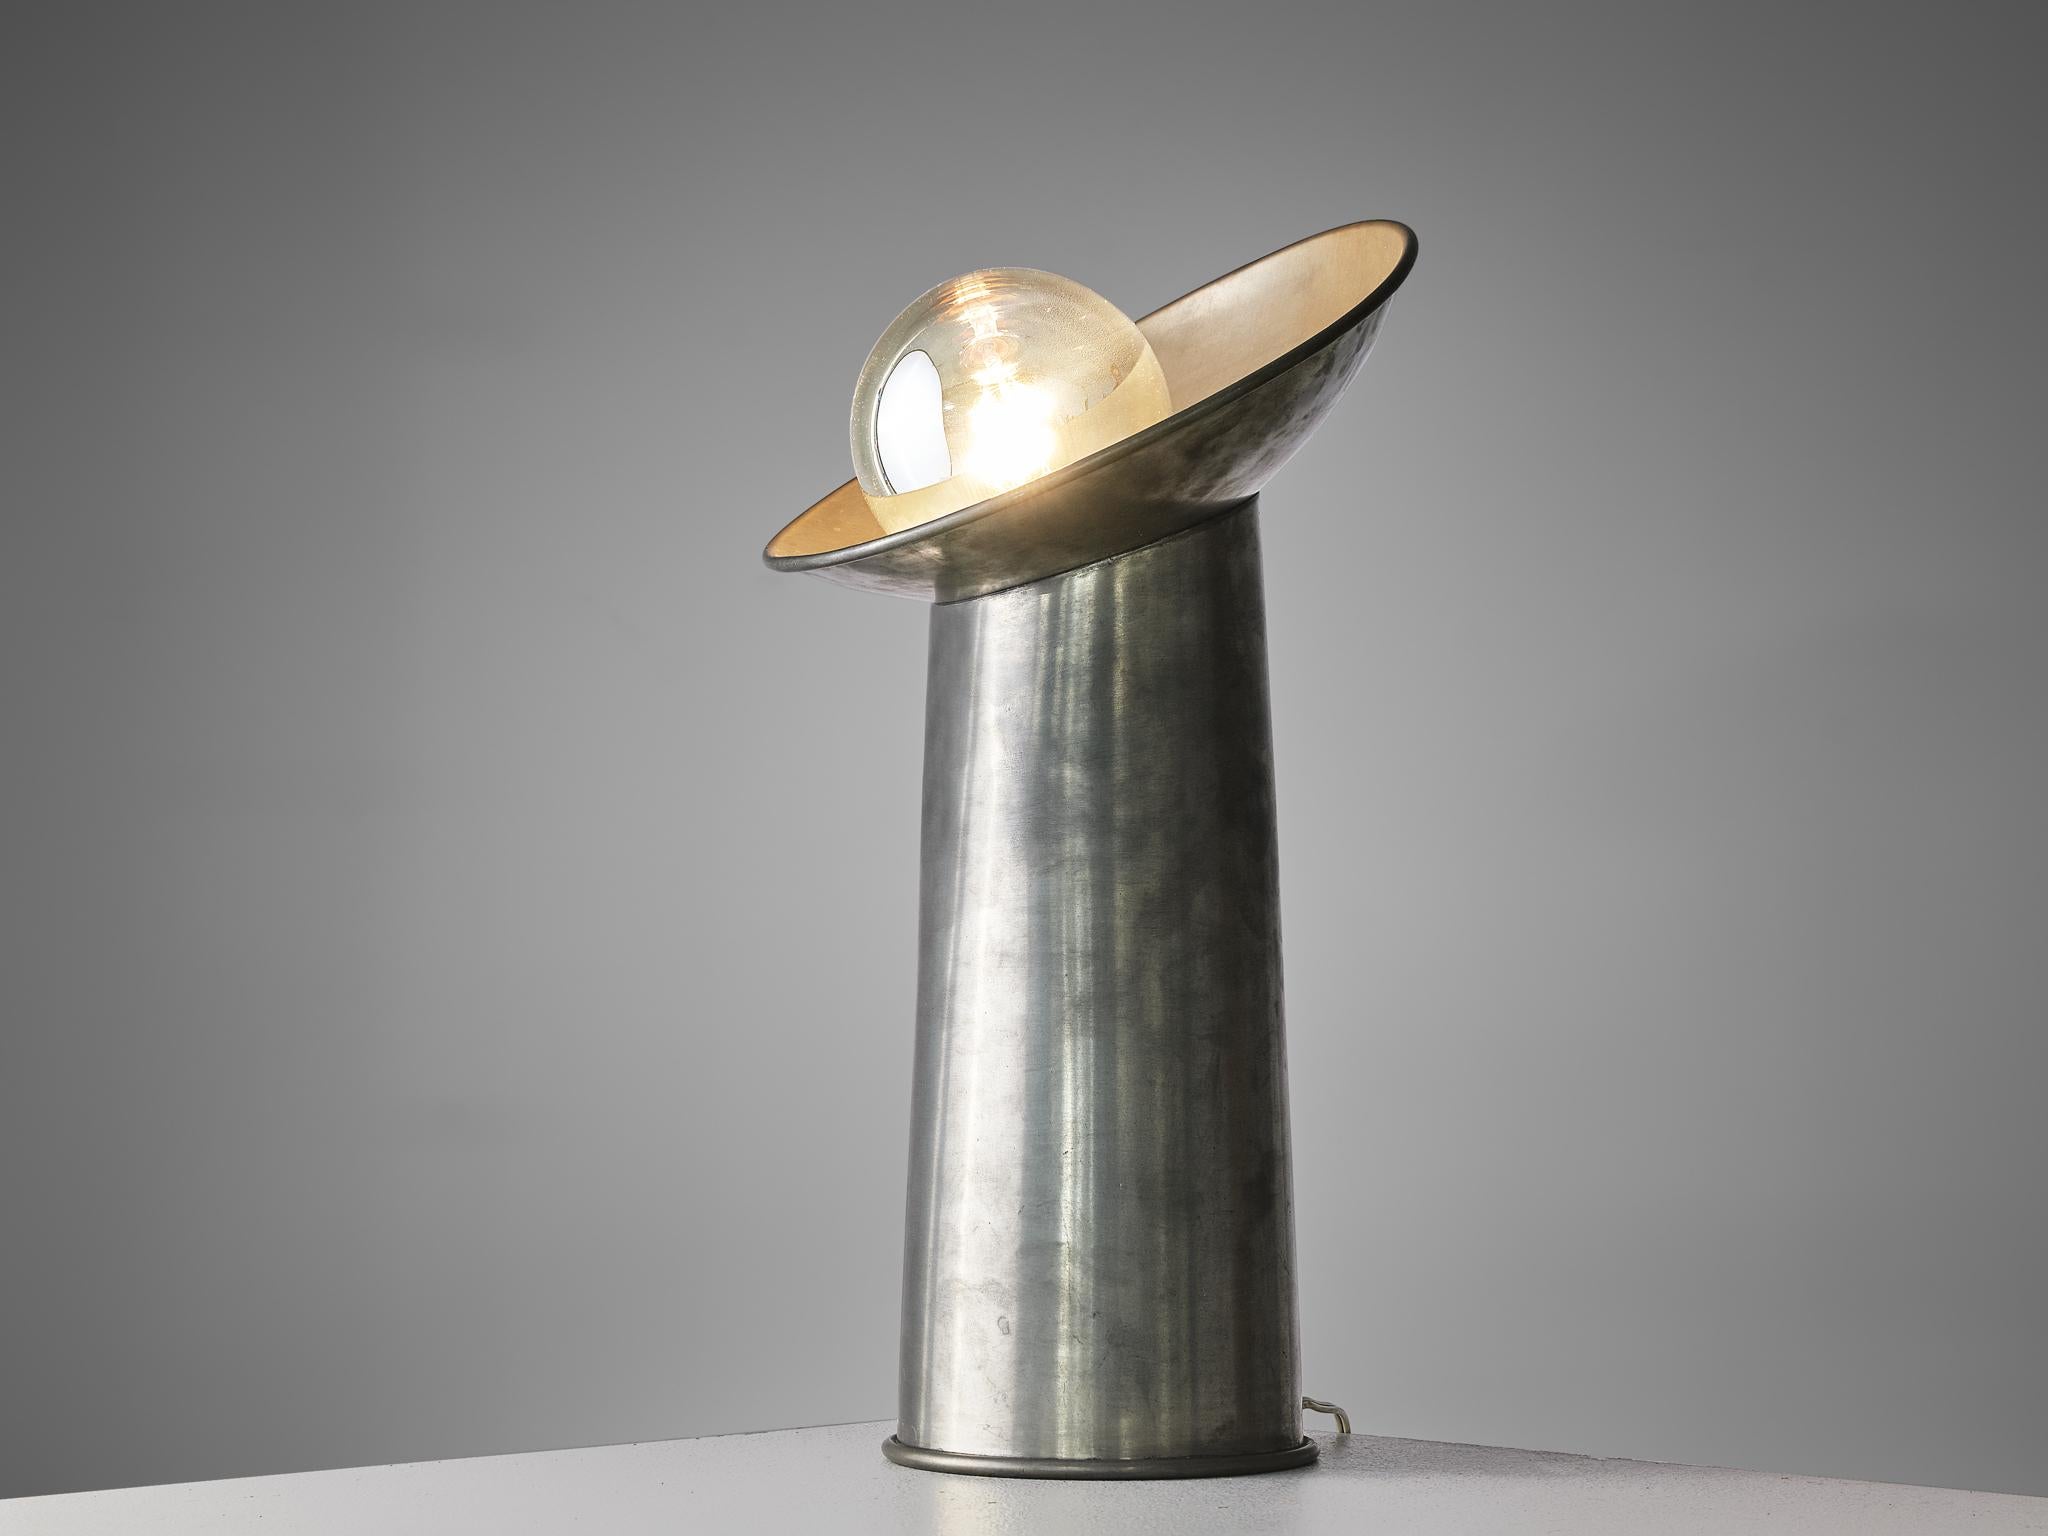 Gjlla Giani for the Nucleo Division of Sormani, 'Radar' table lamp, pewter and glass, Italy, 1971

This rare table lamps is designed by the Italian architect Gjlla Giani for the Nucleo Division of Sormani. The lamp embodies a uniform design;